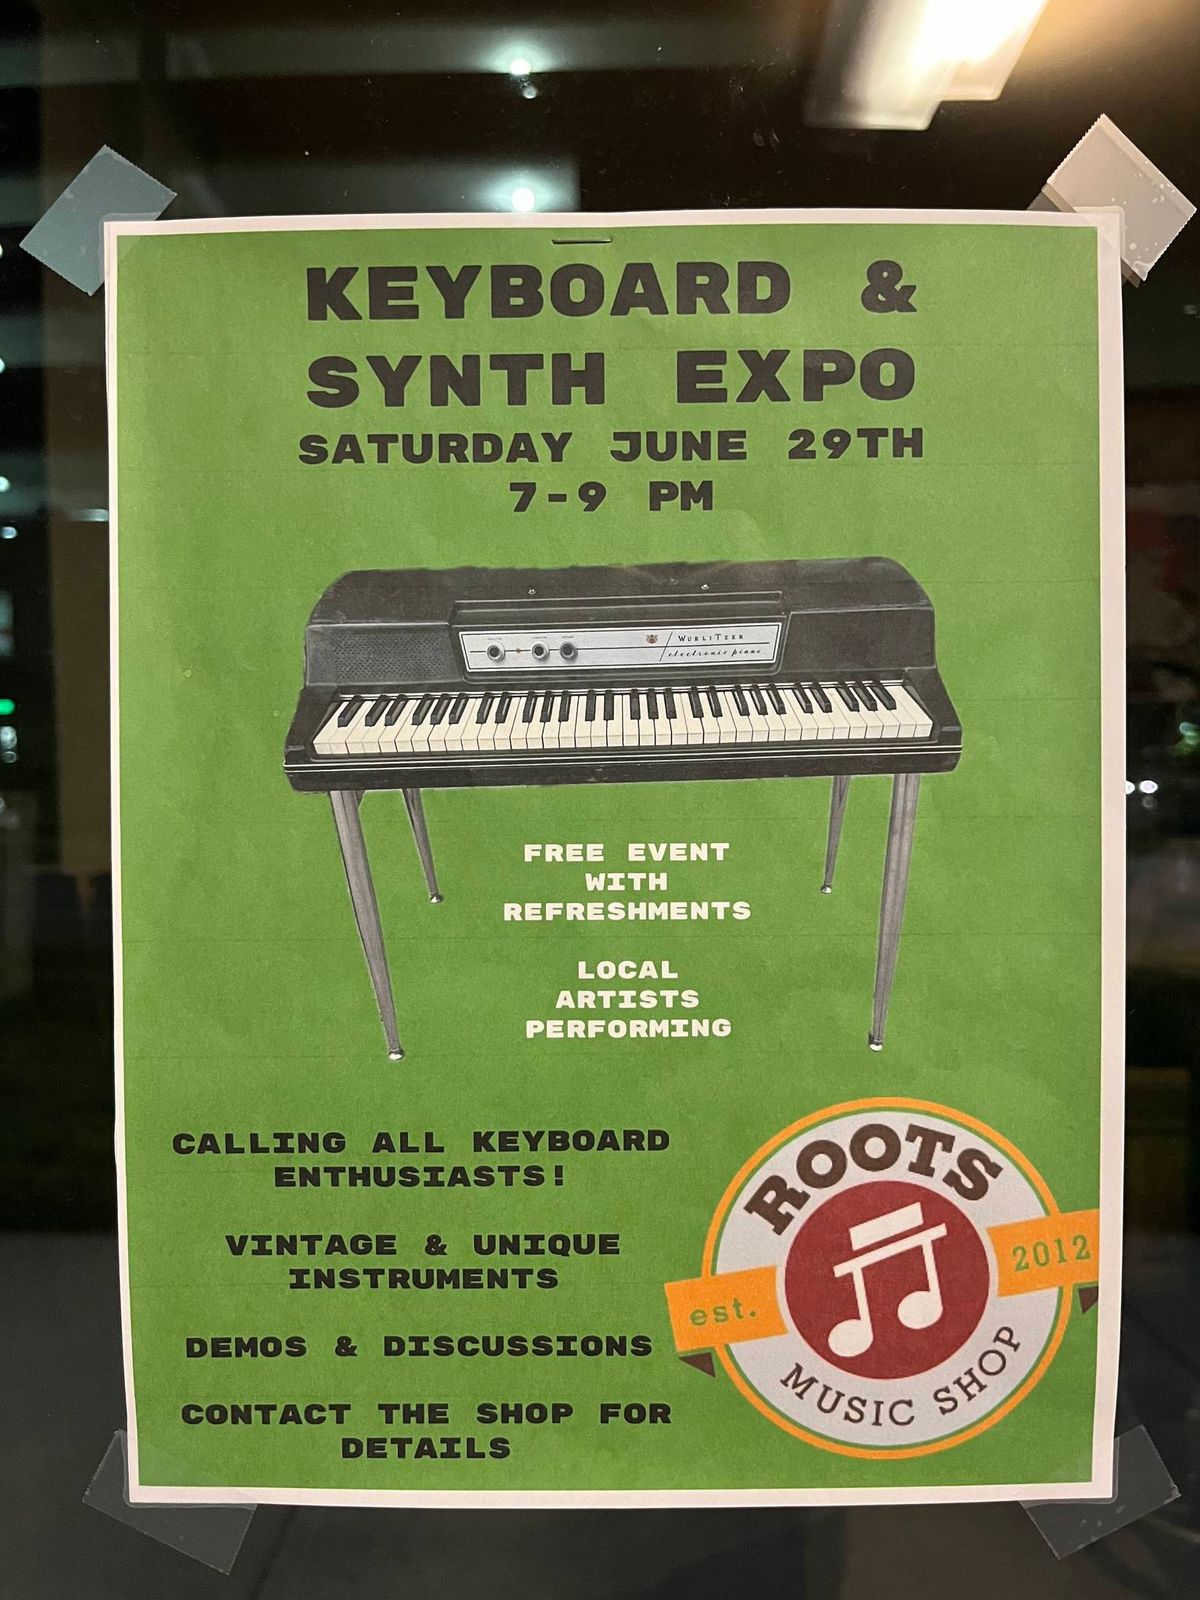 Keyboard & Synth Expo